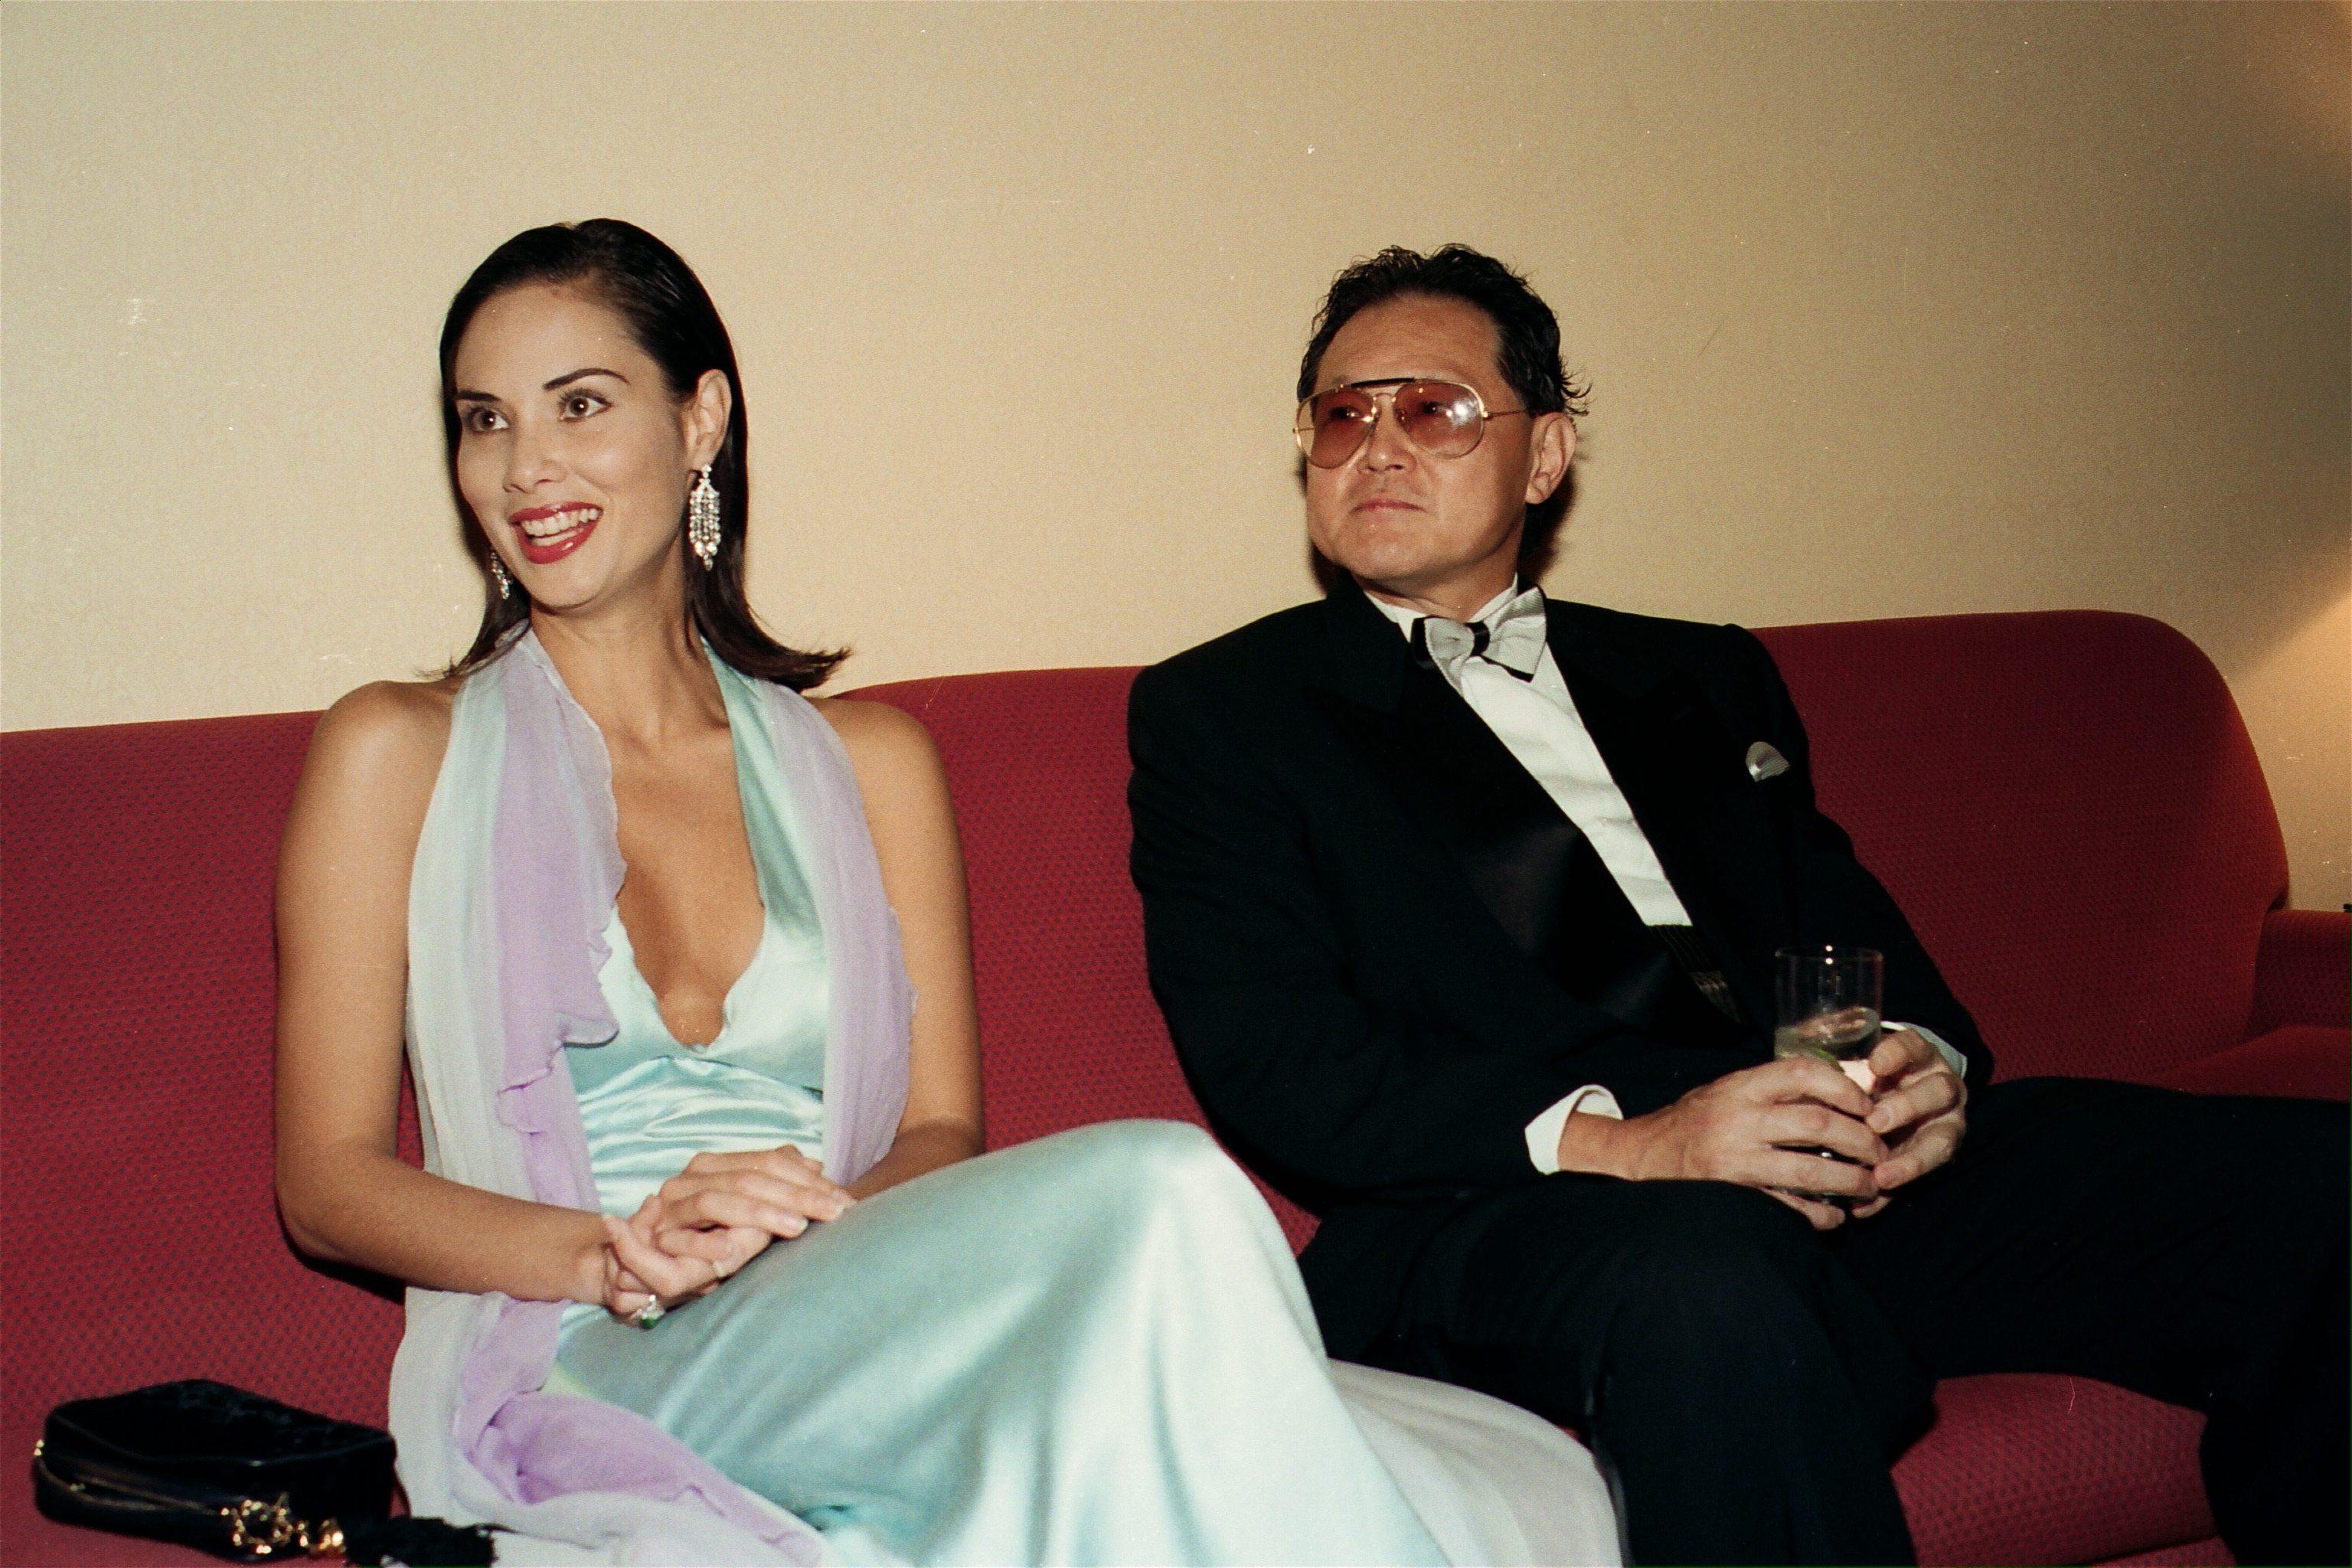 Socialite Terri Holladay (left) and billionaire Cecil Chao at an event in 1996. According to a memorial website, a private family celebration of her life has been planned. Photo: SCMP